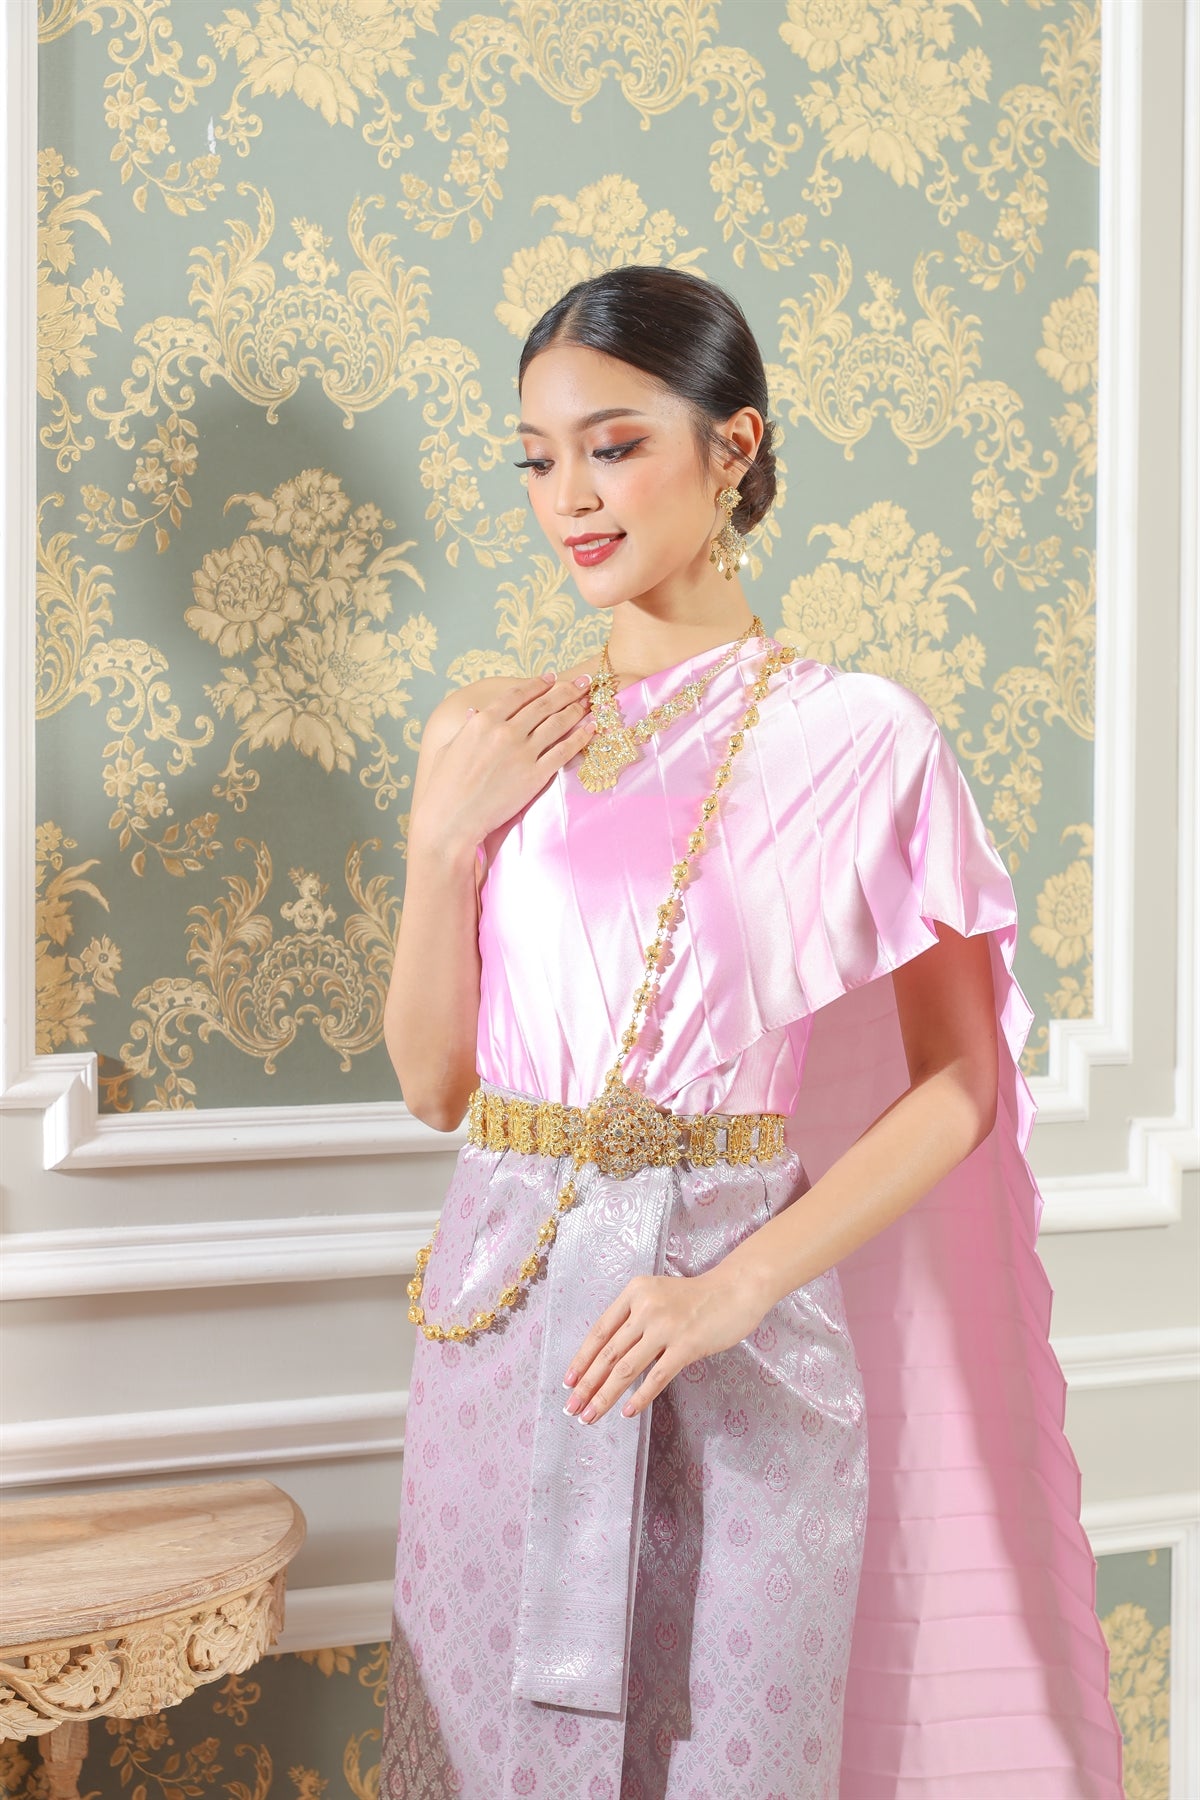 Beautiful Thai traditional clothing for women.